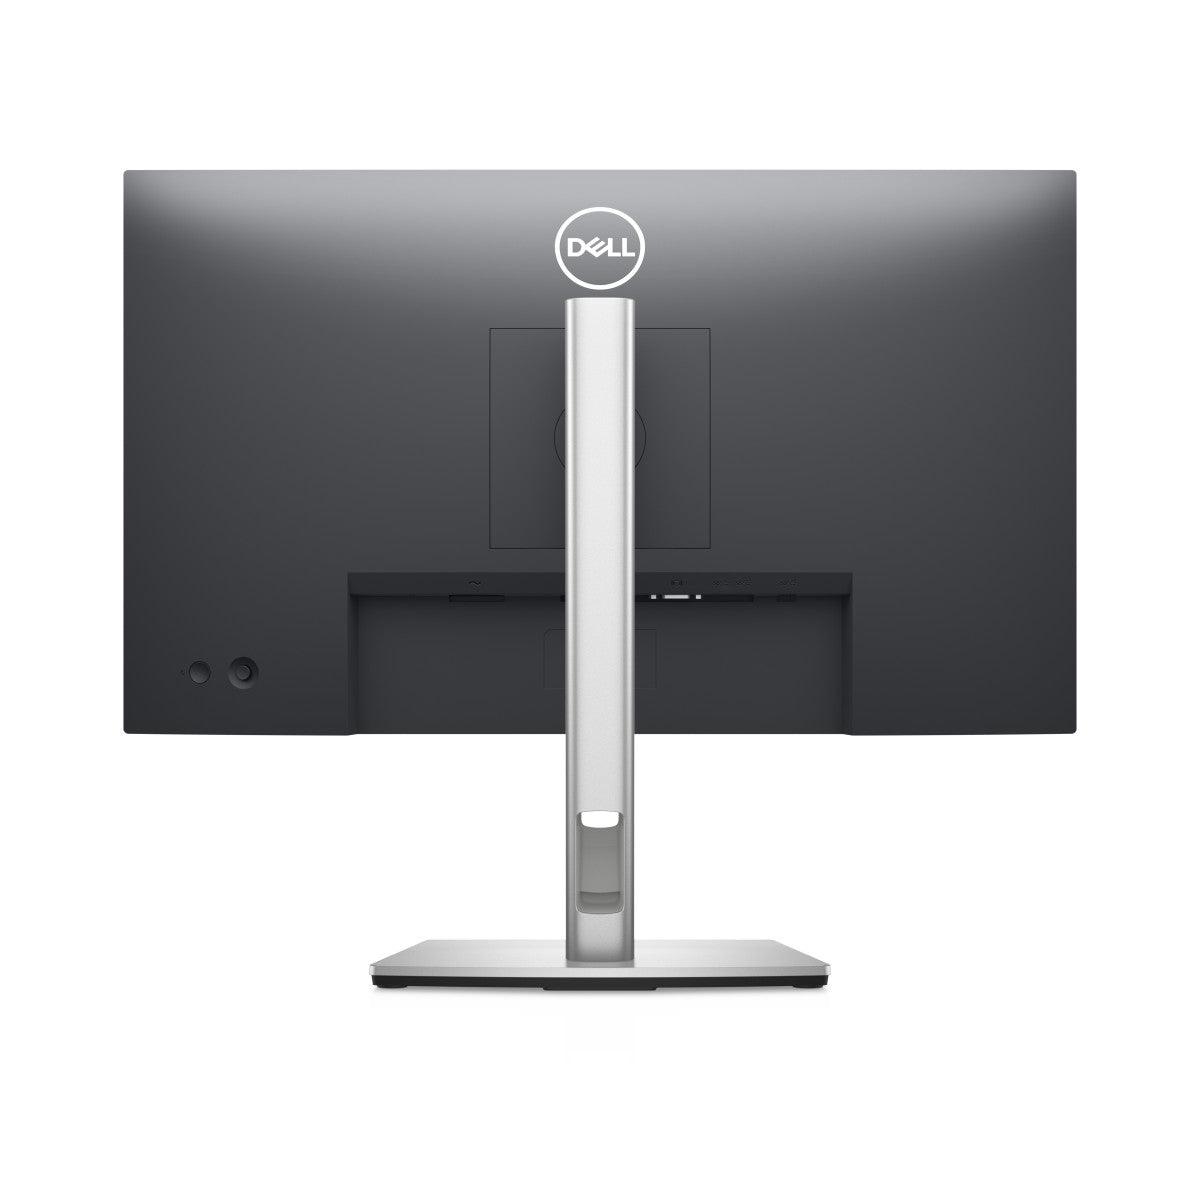 Dell 24 Monitor - P2422H 23 Full HD 60 Hz IPS Monitor - Want a New Gadget